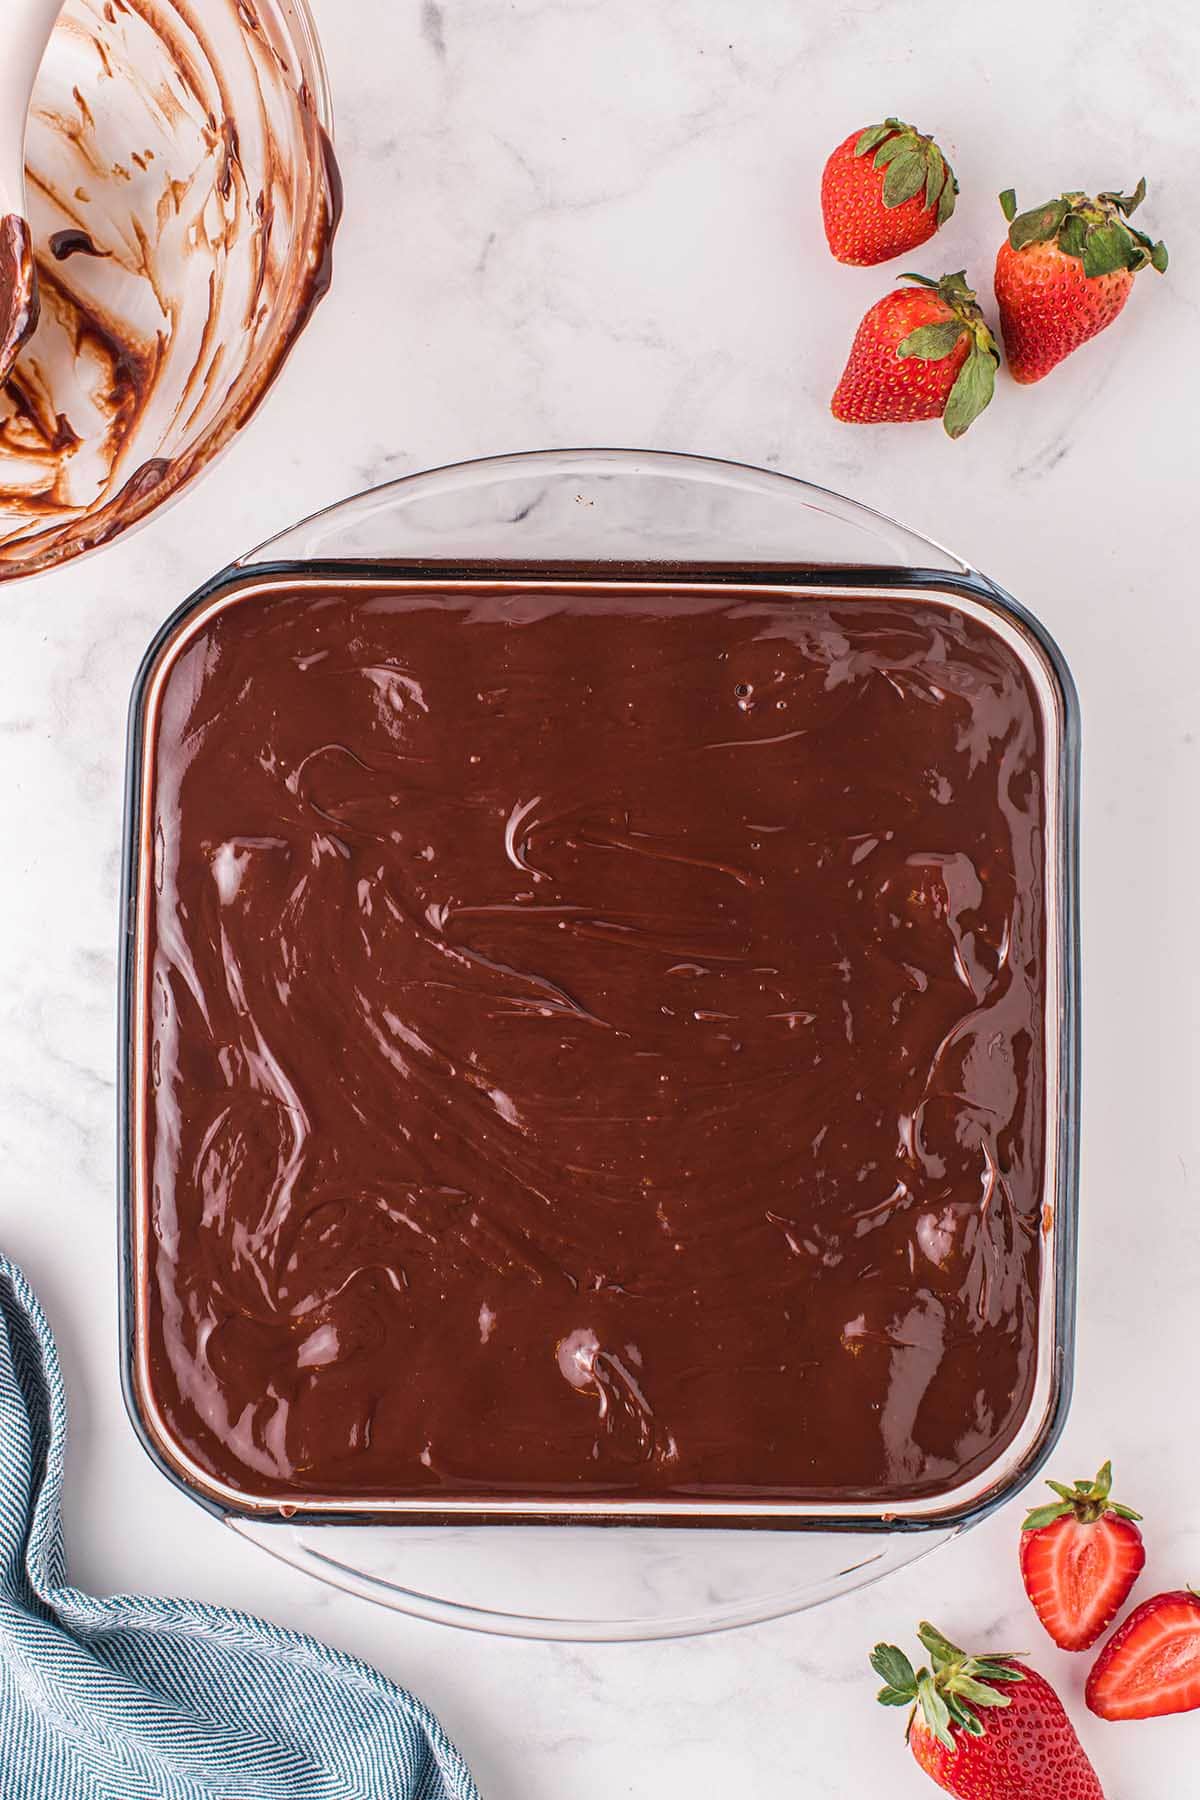 pour ganache on top of the strawberries